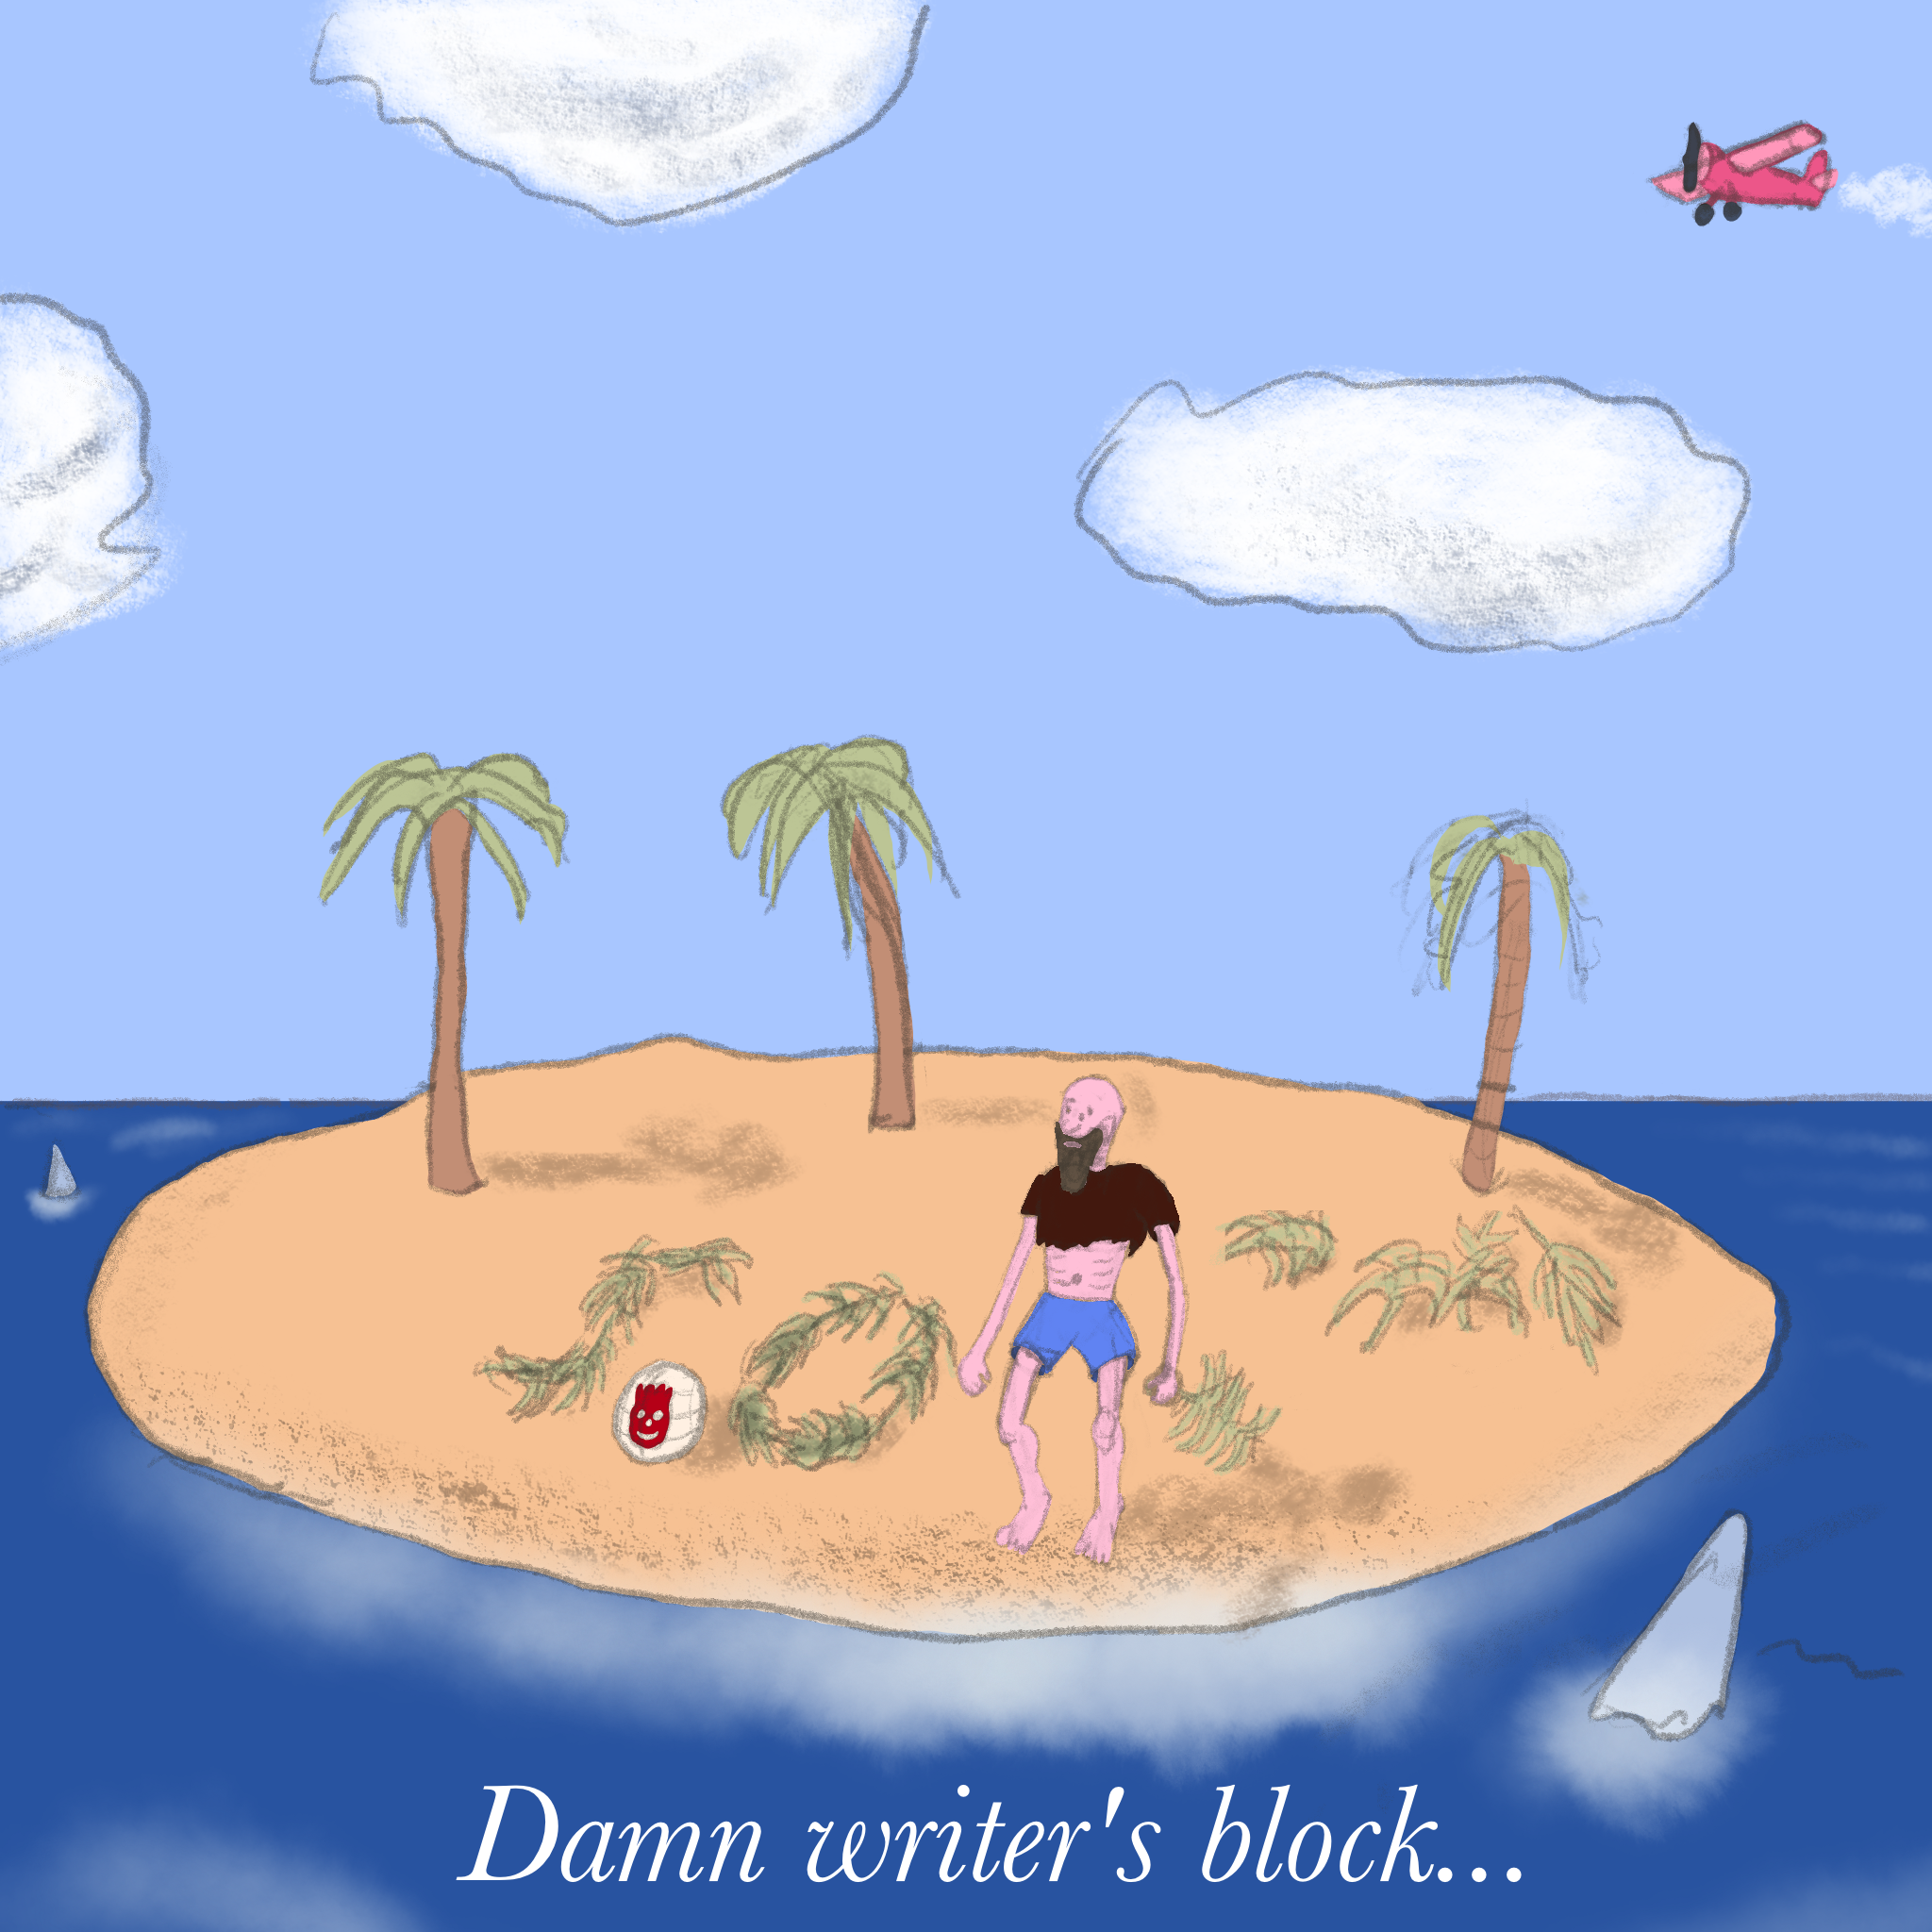 Emaciated man on desert island, has laid out palm fronds in shape of "S.O". With stumped expression, looks at the phrase. You can see sharks circling the island, and a plane flying overhead. Caption: "Damn writer's block."